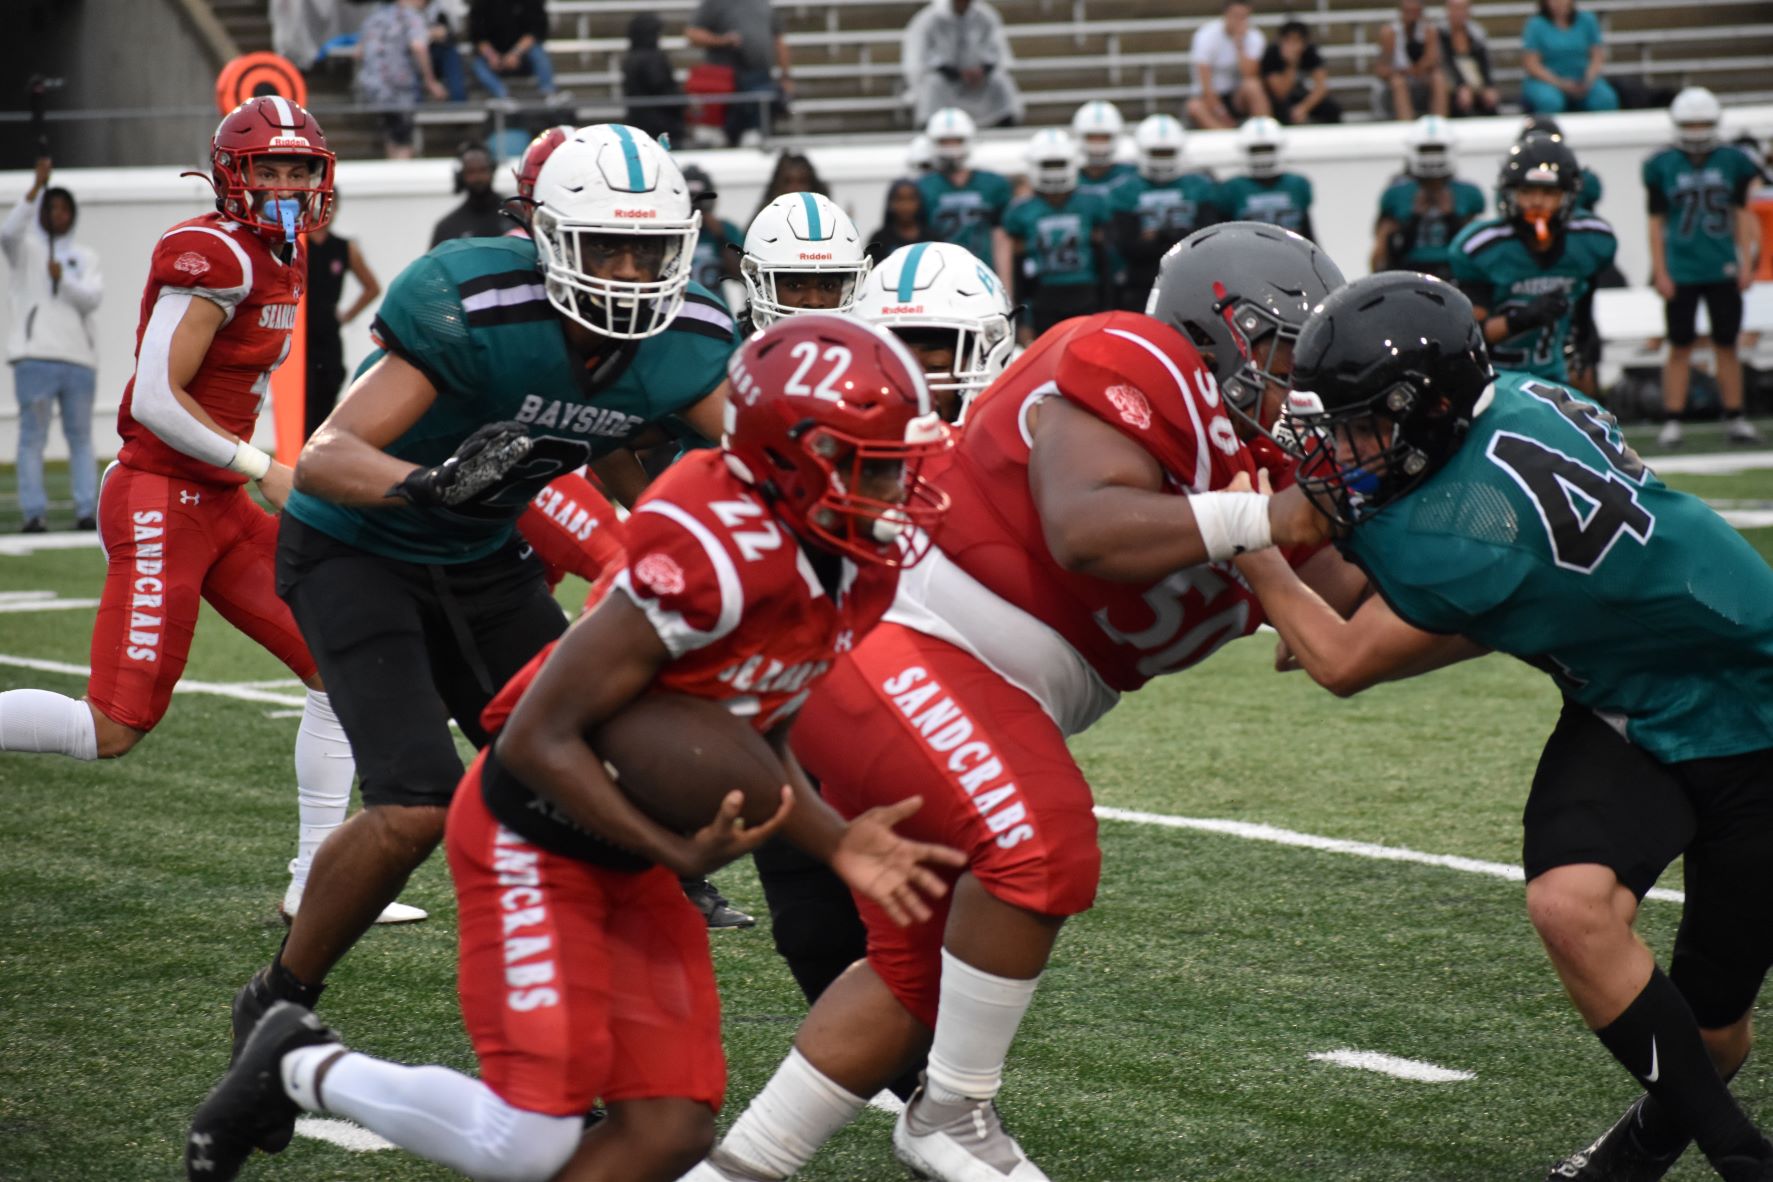 Seabreeze running back Tyrone Cordare (22) looks for an opening in Bayside's defense as the two teams battle in the Kickoff Classic preseason contest.